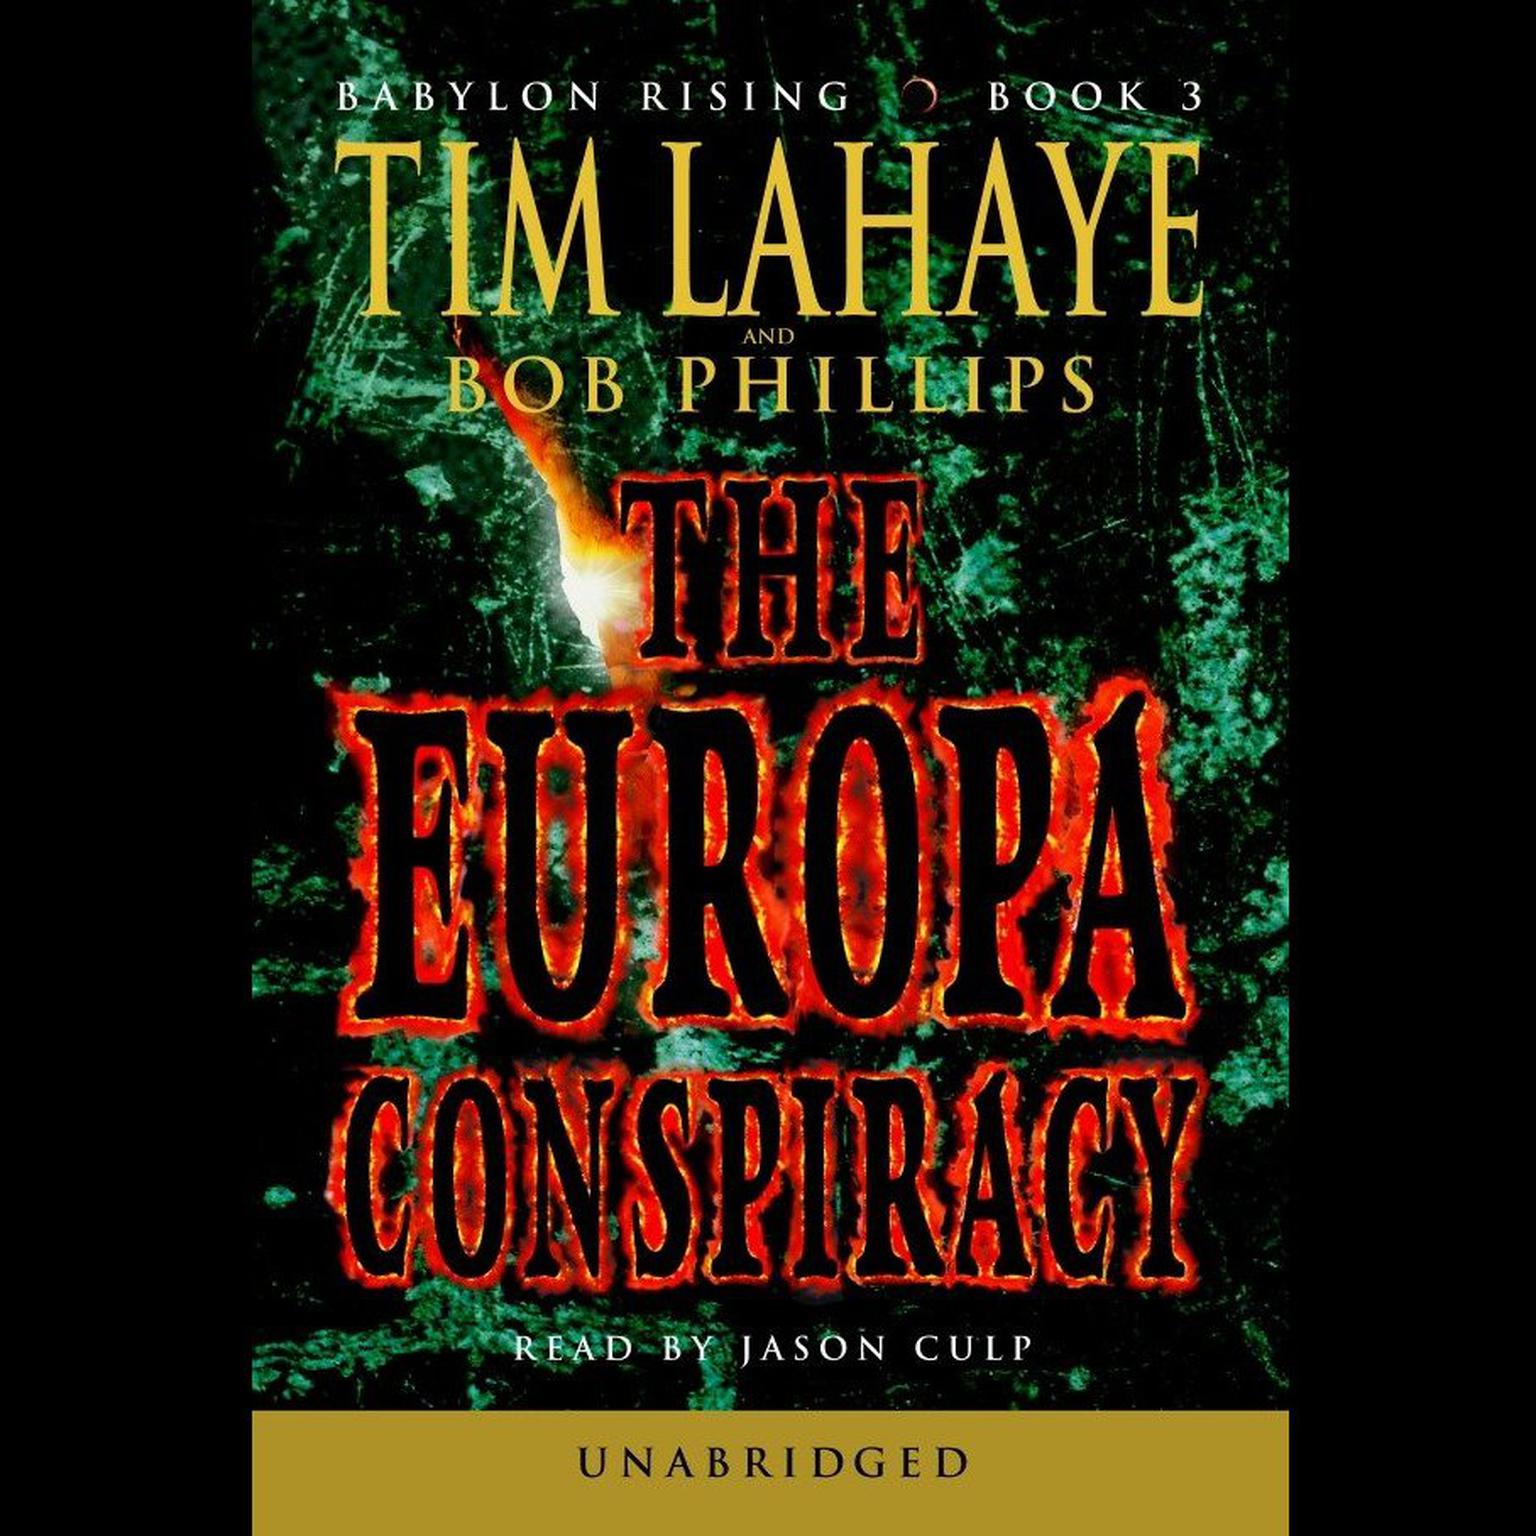 Babylon Rising Book 3: The Europa Conspiracy Audiobook, by Tim LaHaye